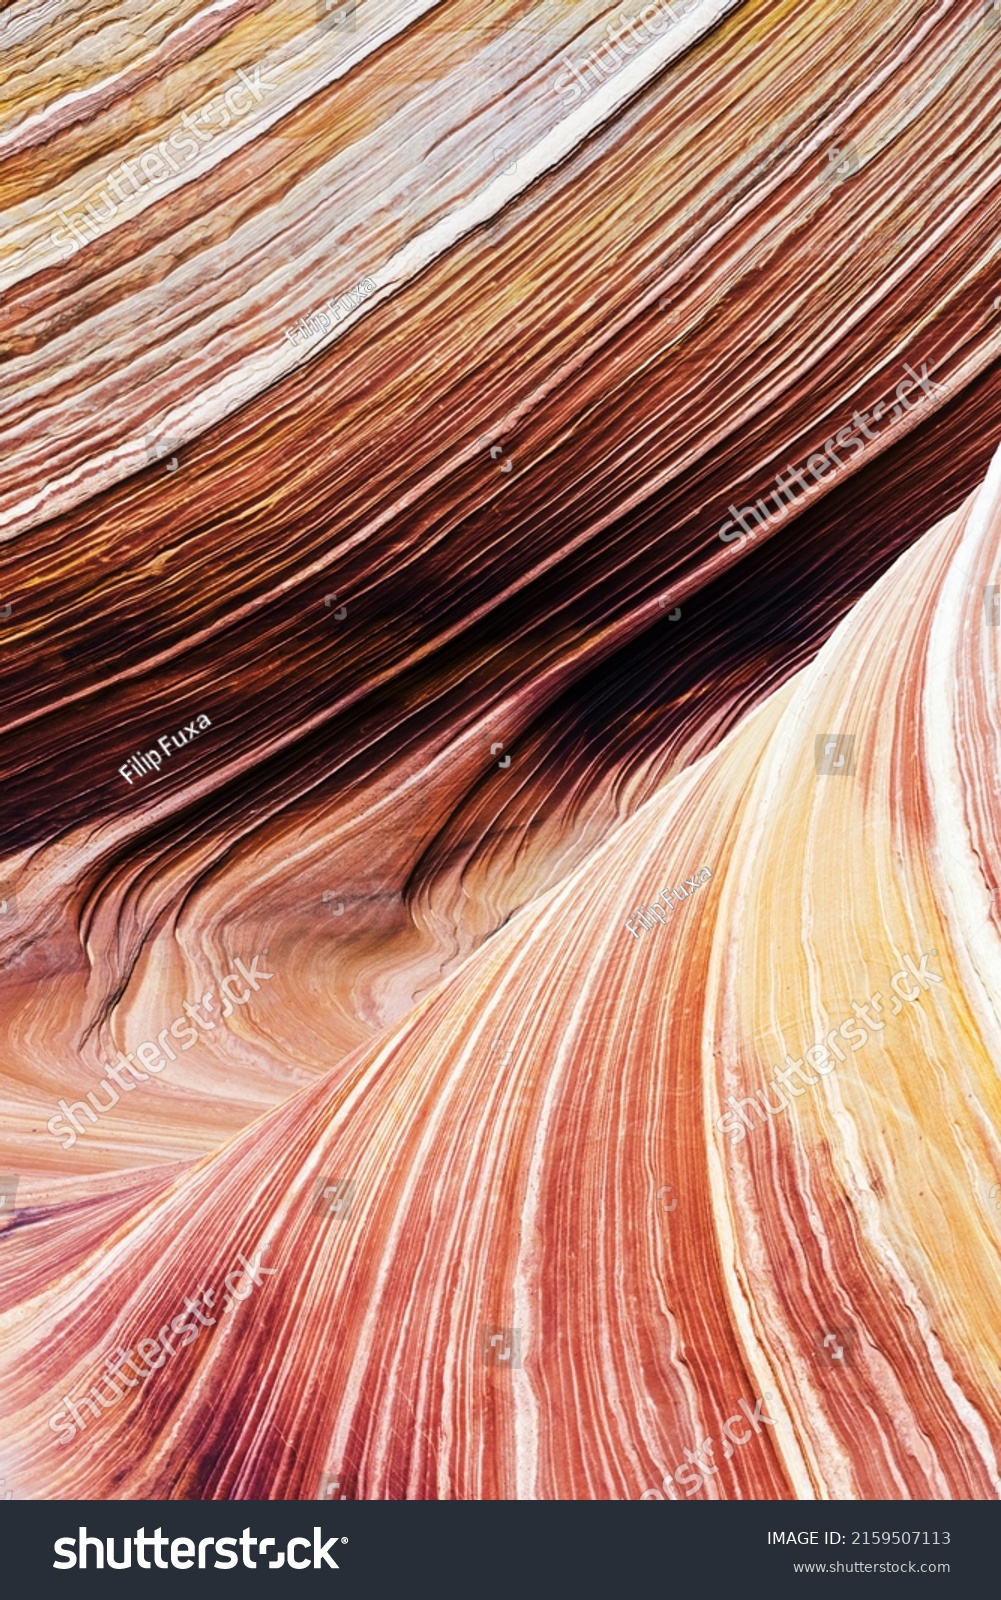 The Wave is an awesome vivid swirling petrified dune sandstone formation in Coyote Buttes North. It could be seen in Paria Canyon-Vermilion Cliffs Wilderness, Utah. USA #2159507113